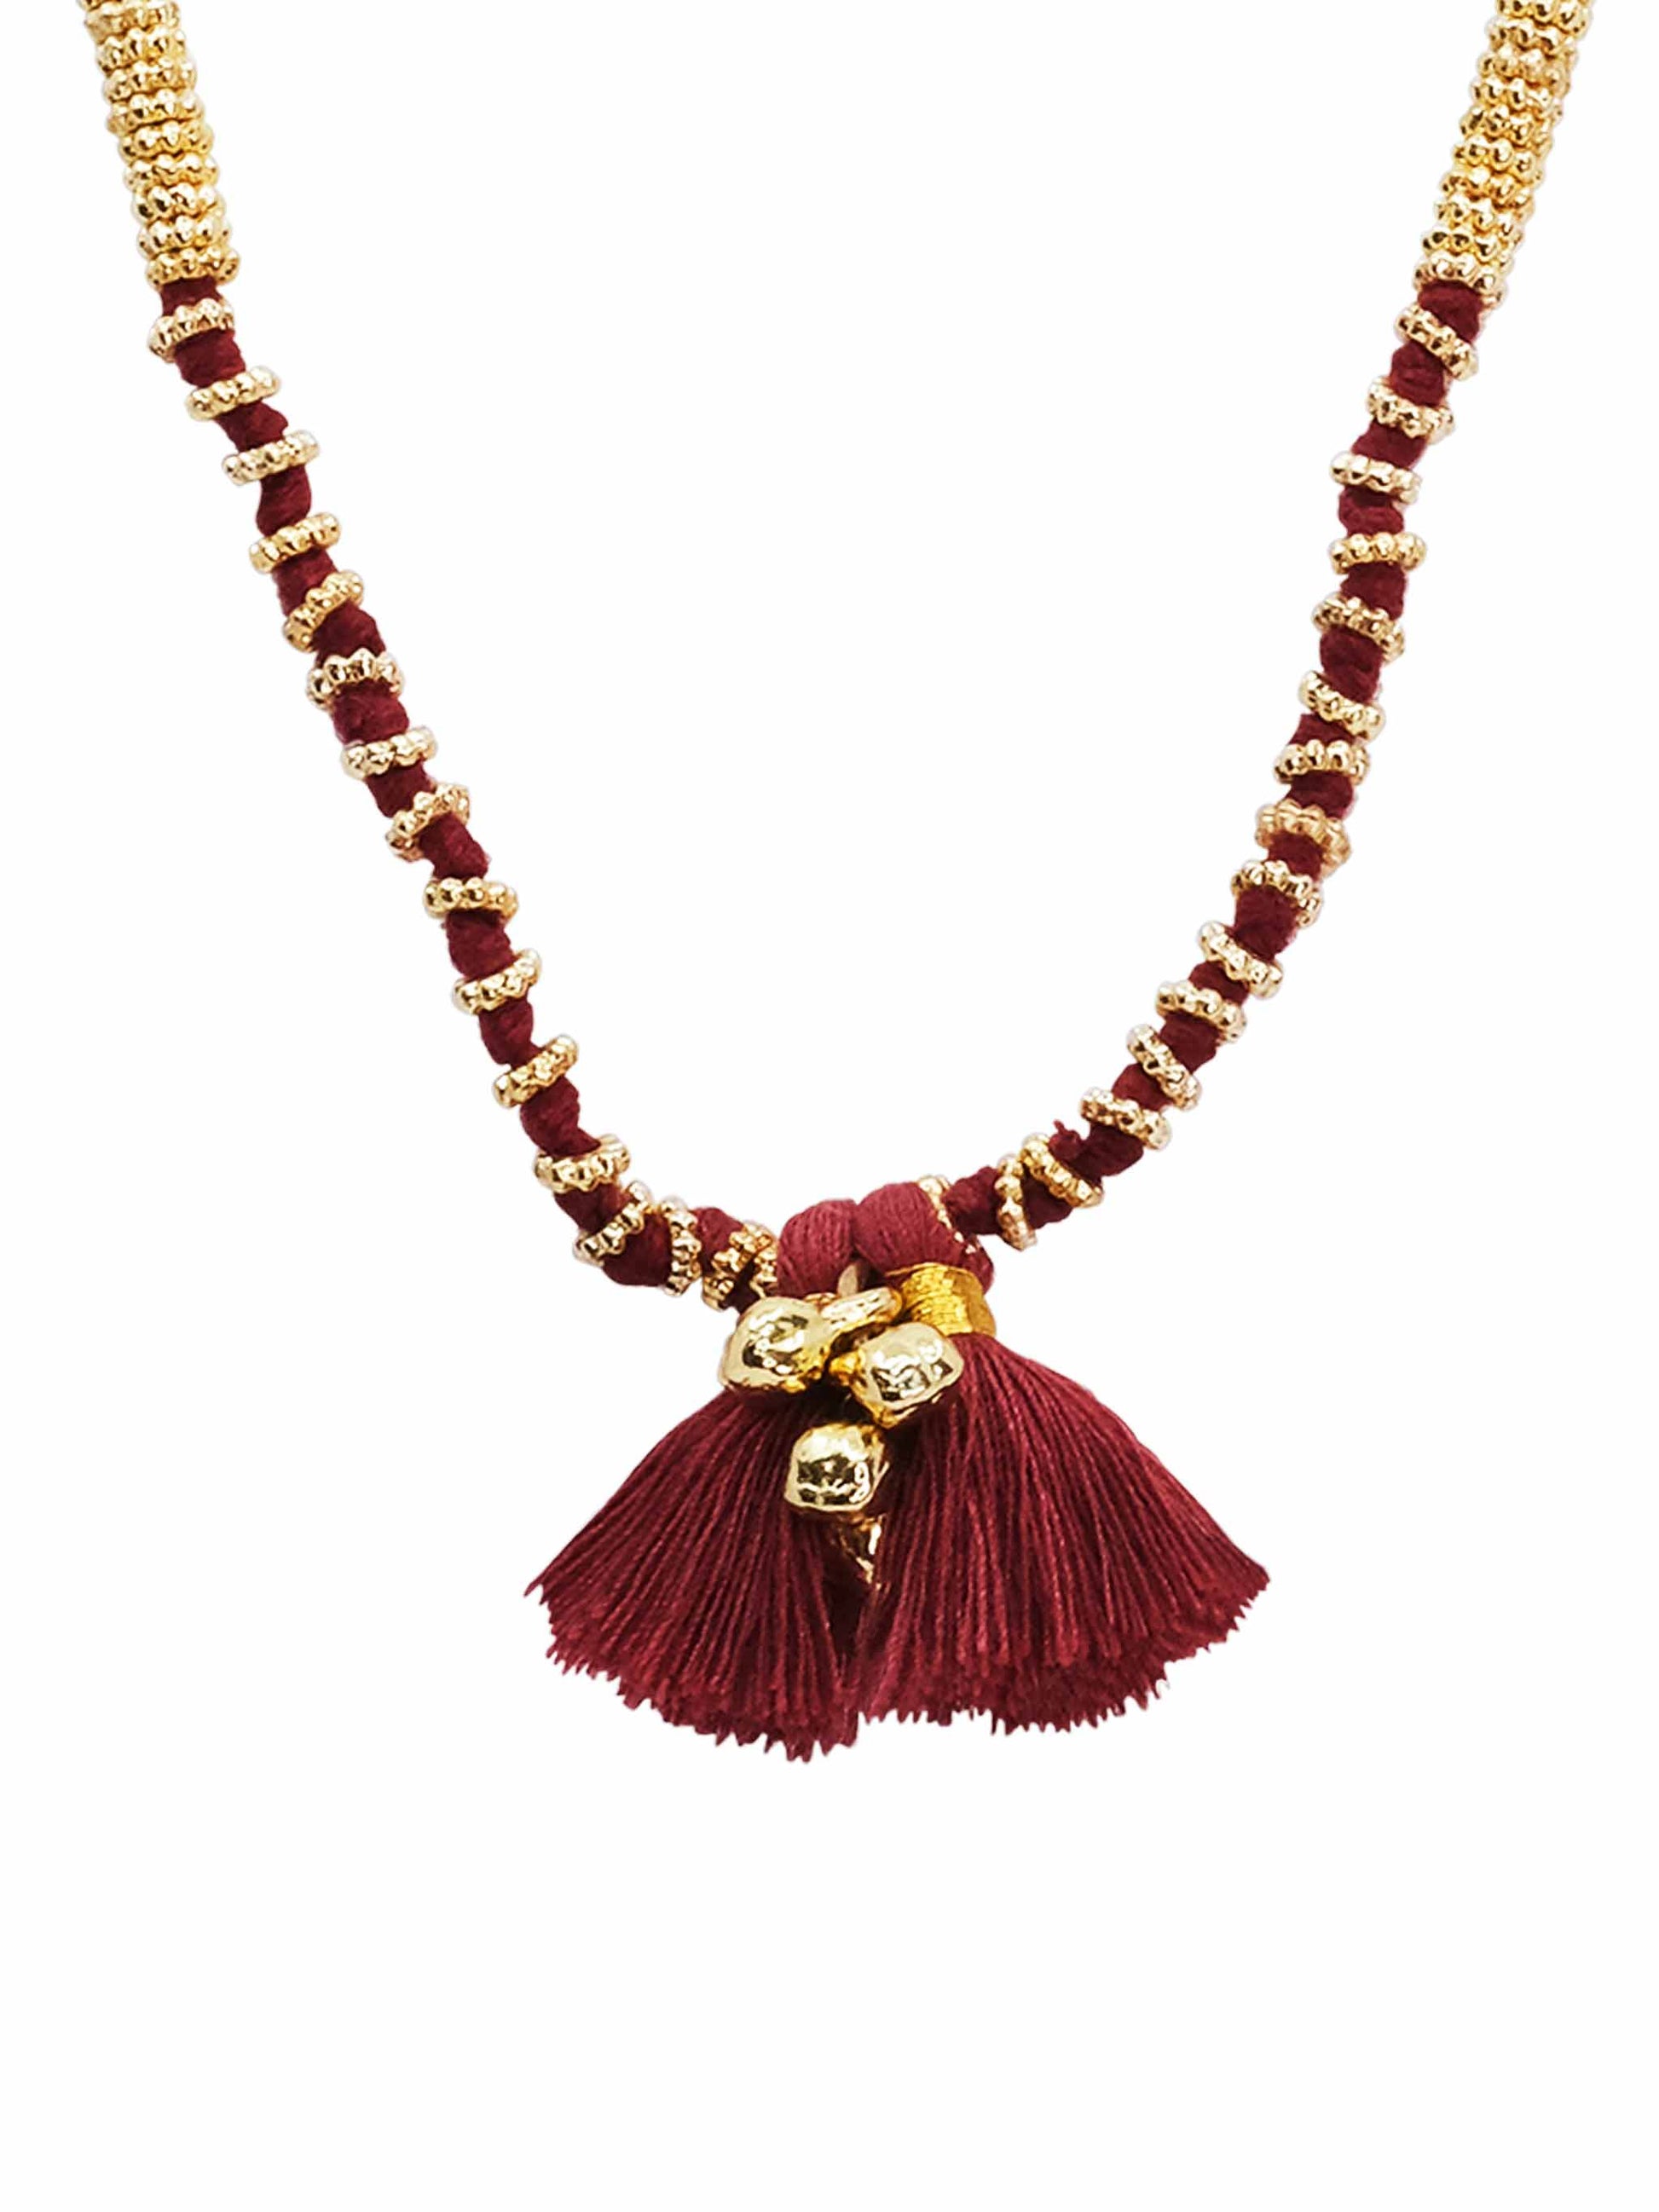 Gold Tone Lariya Beaded Long Necklace with Rose Red Tassels